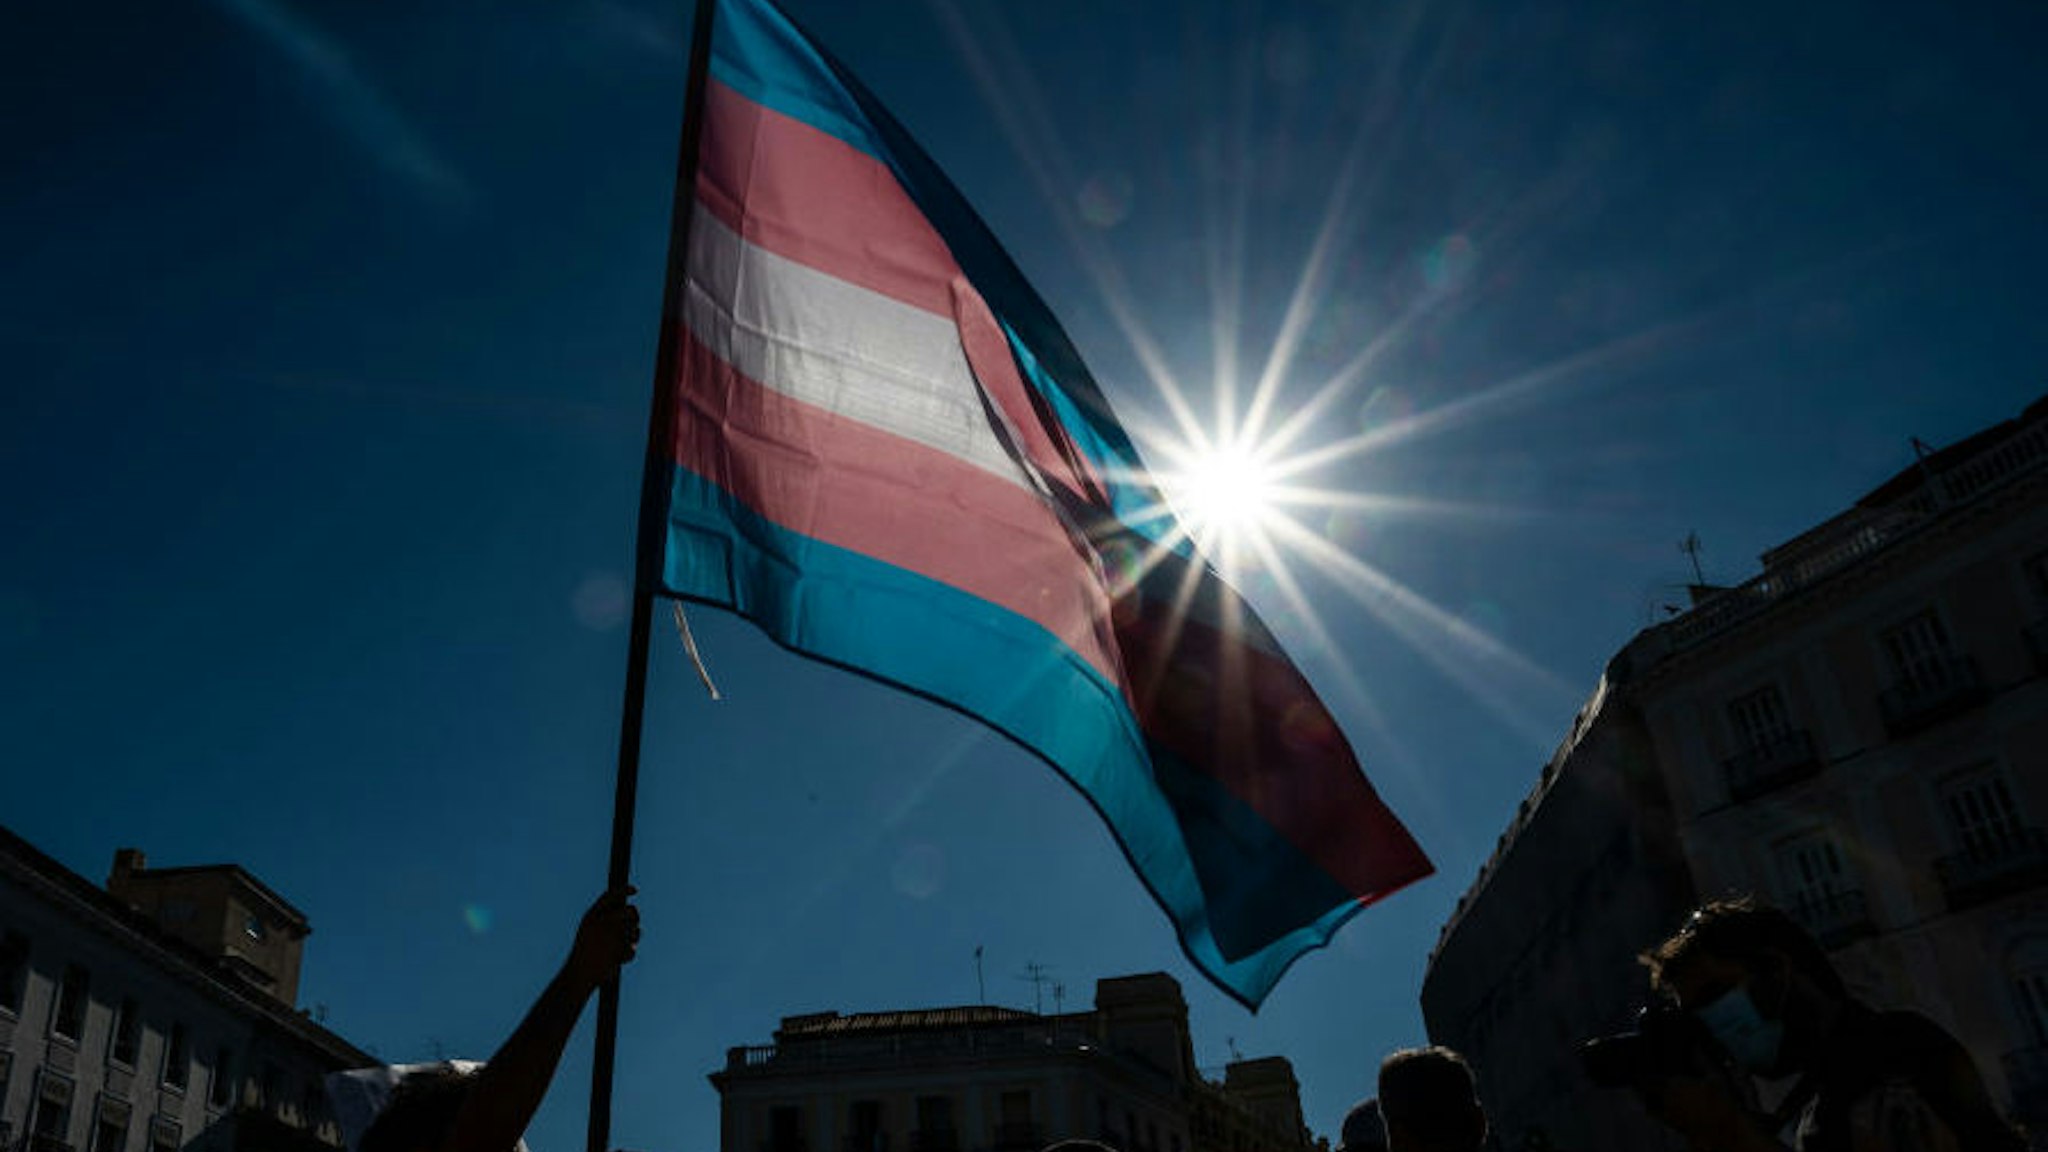 Demonstrator waving the Trans flag attends a protest where Trans community demand a state law that will guarantee gender self-determination. The protest coincides with the Pride celebrations that are taking place this week. (Photo by Marcos del Mazo/LightRocket via Getty Images)